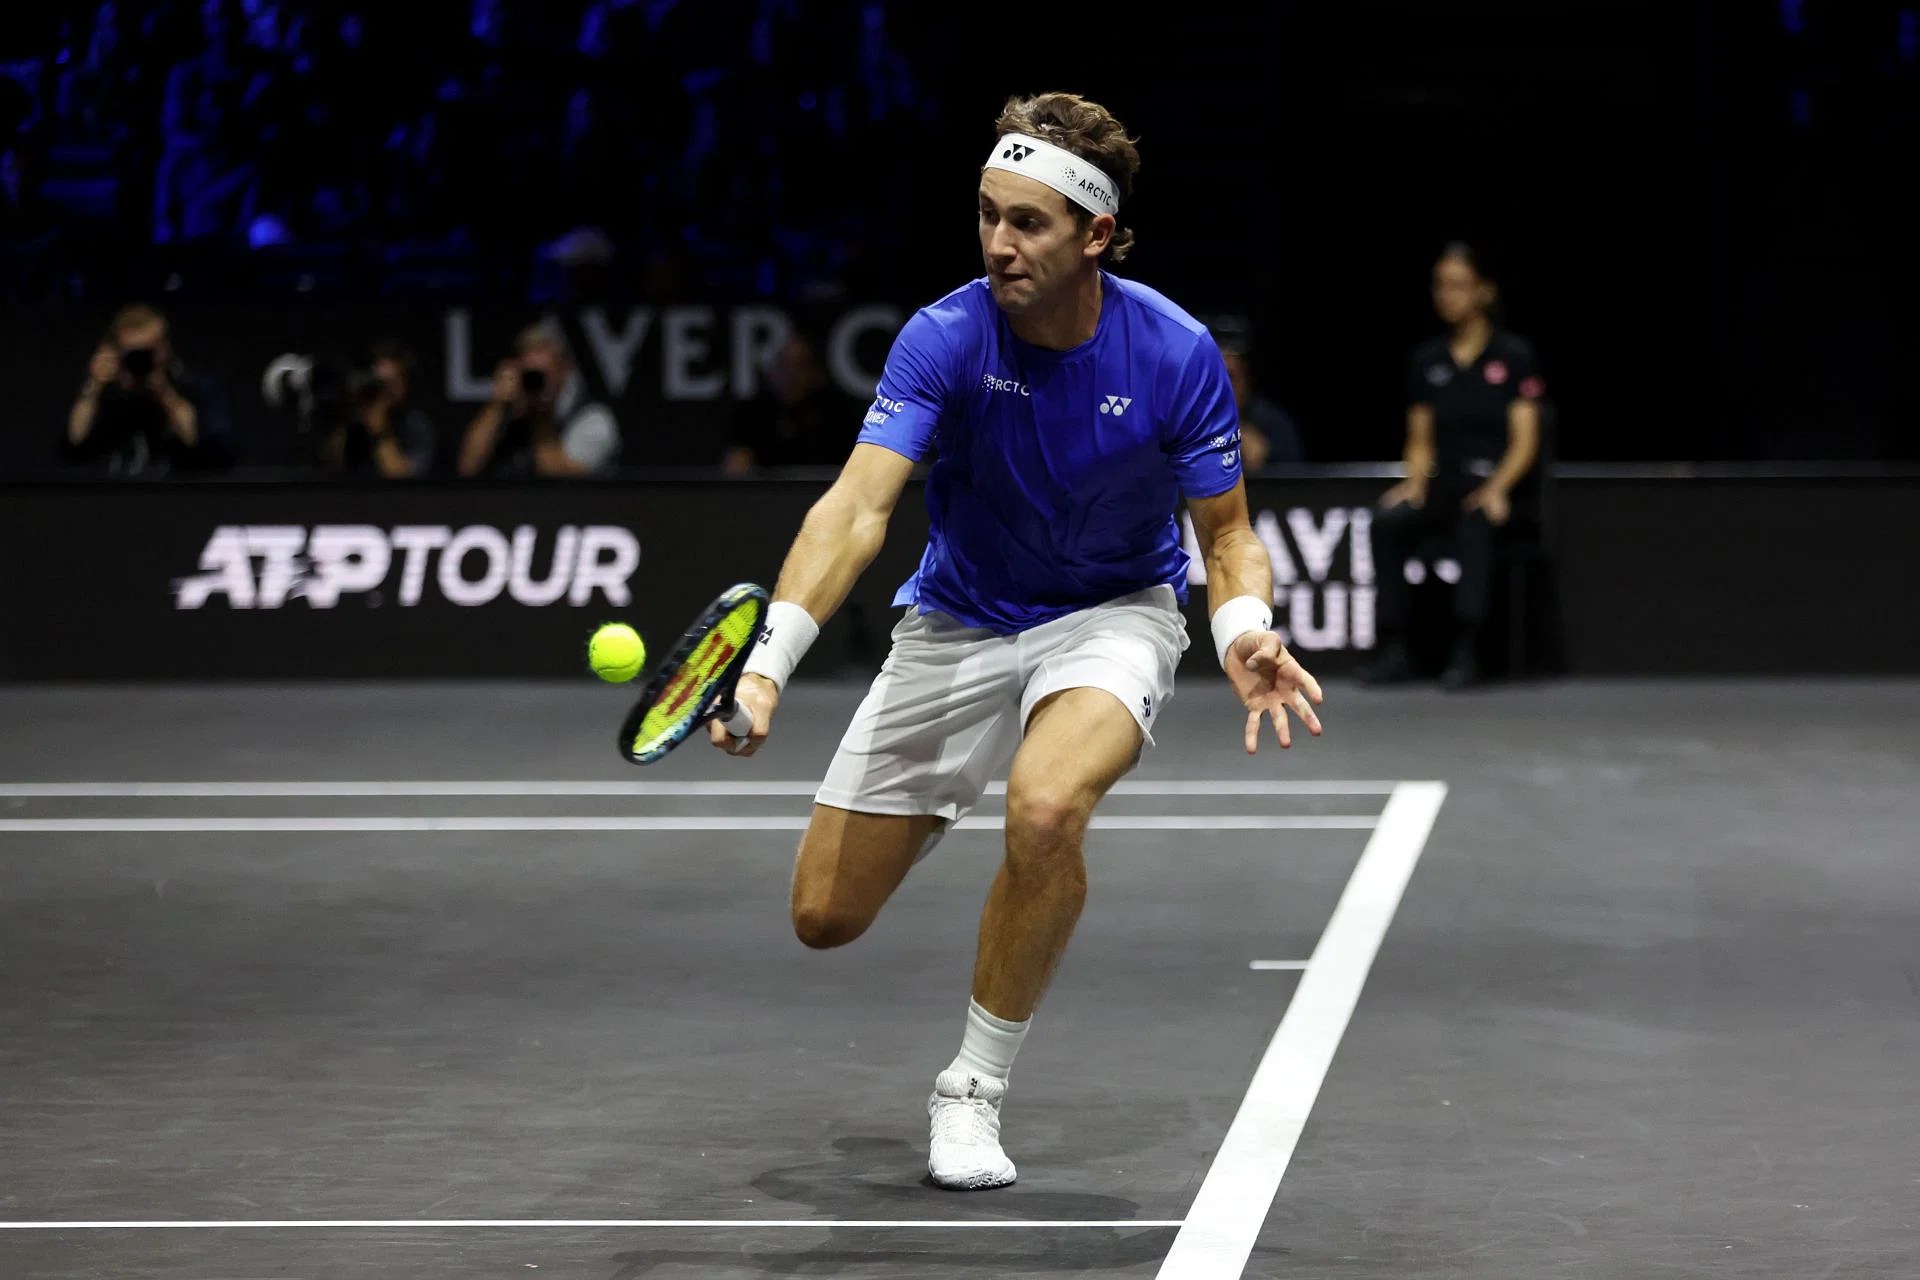 ATP Tour Finals Highlights: Casper Ruud holds his nerve to defeat Taylor Fritz in three sets, books spot in semifinals of ATP Finals 2022 - Watch Highlights